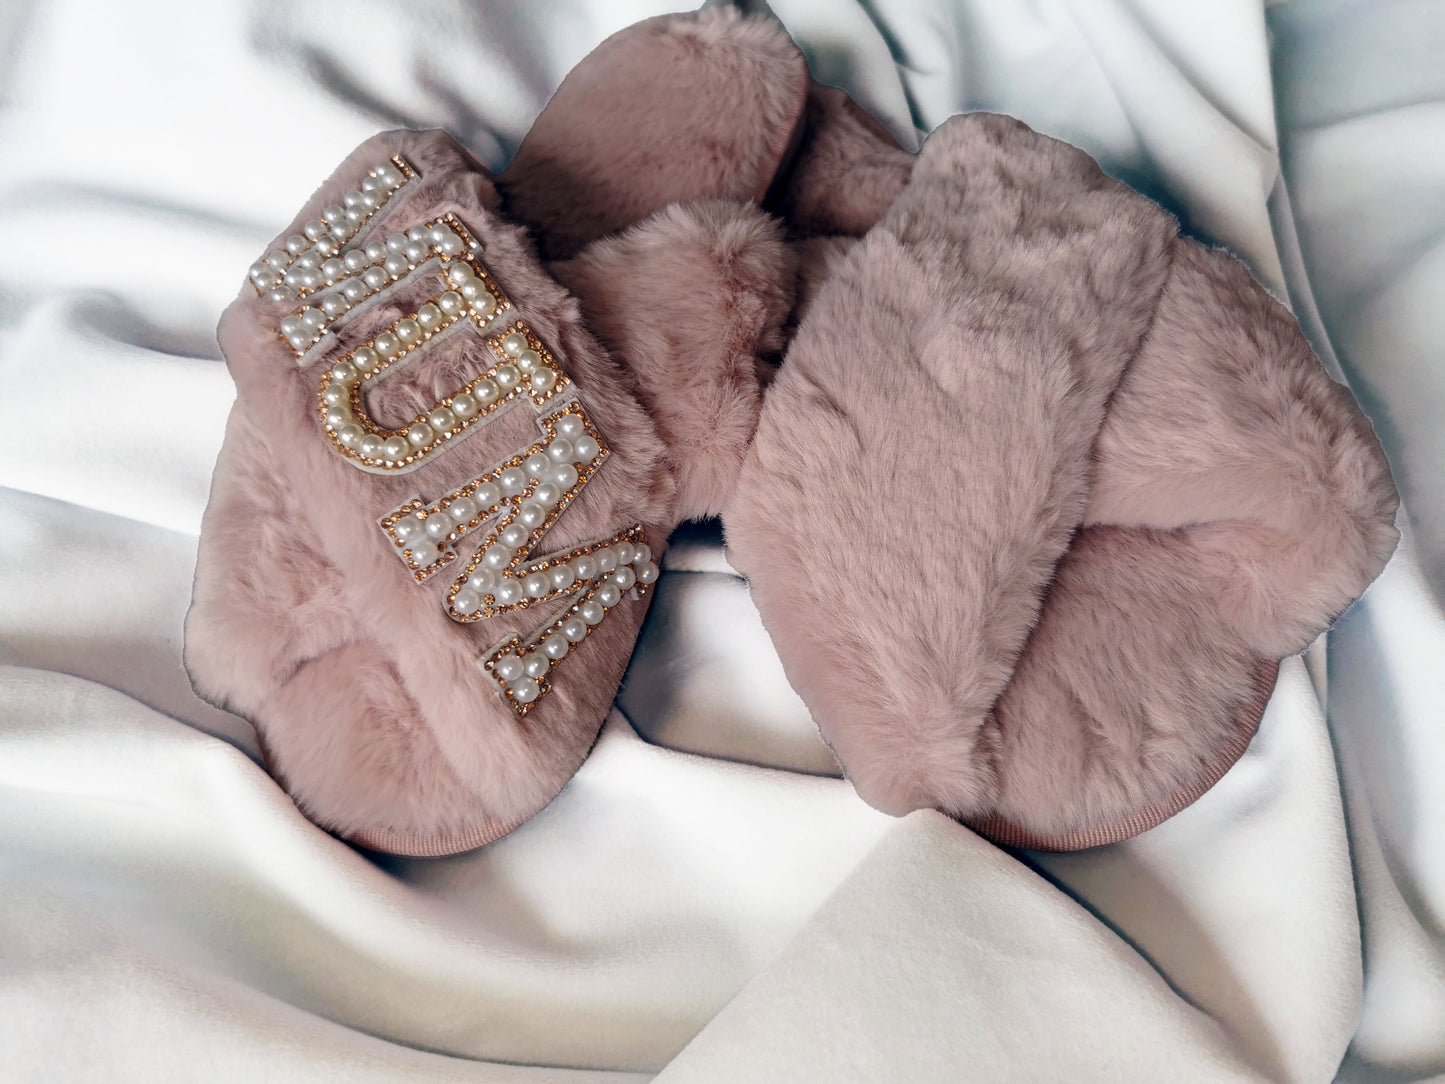 Personalised Mrs Slippers. The Perfect Comfy Bridal Shoe and Footwear for your wedding day